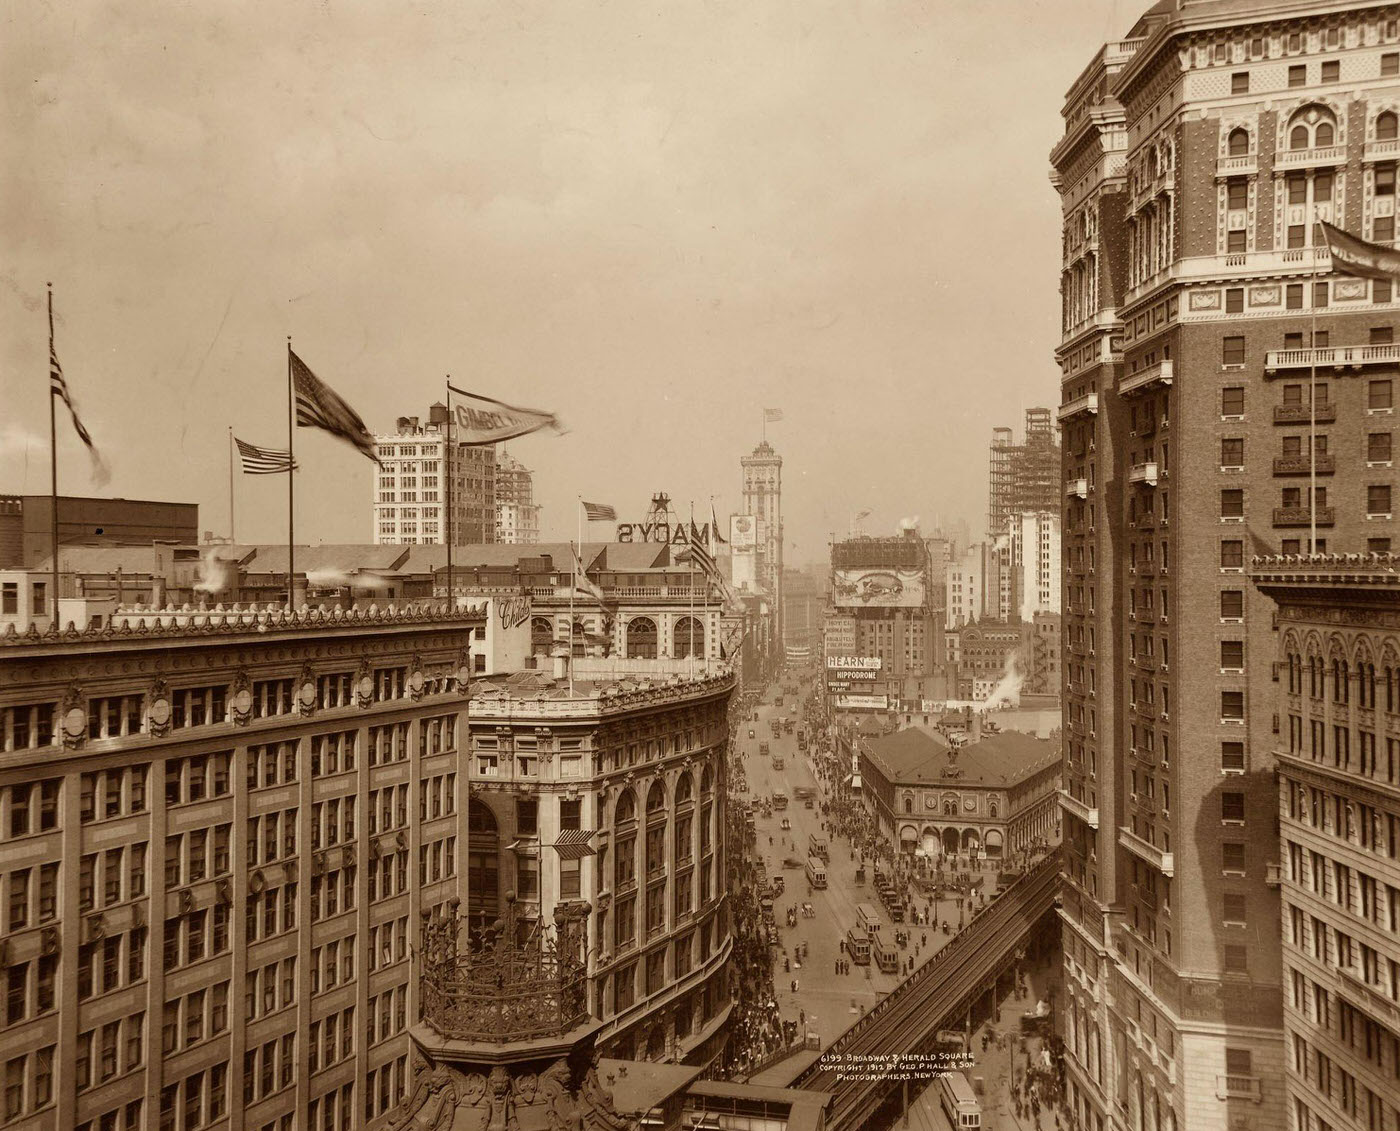 Broadway &Amp;Amp; Herald Square: View Along Broadway Passing Herald Square, Elevated Train Track Above Avenue Of The Americas With Visible Structures Including Gimbels And Macy'S Department Stores, Notel Normandie, Hippodrome, Times Tower, New York City, 1912